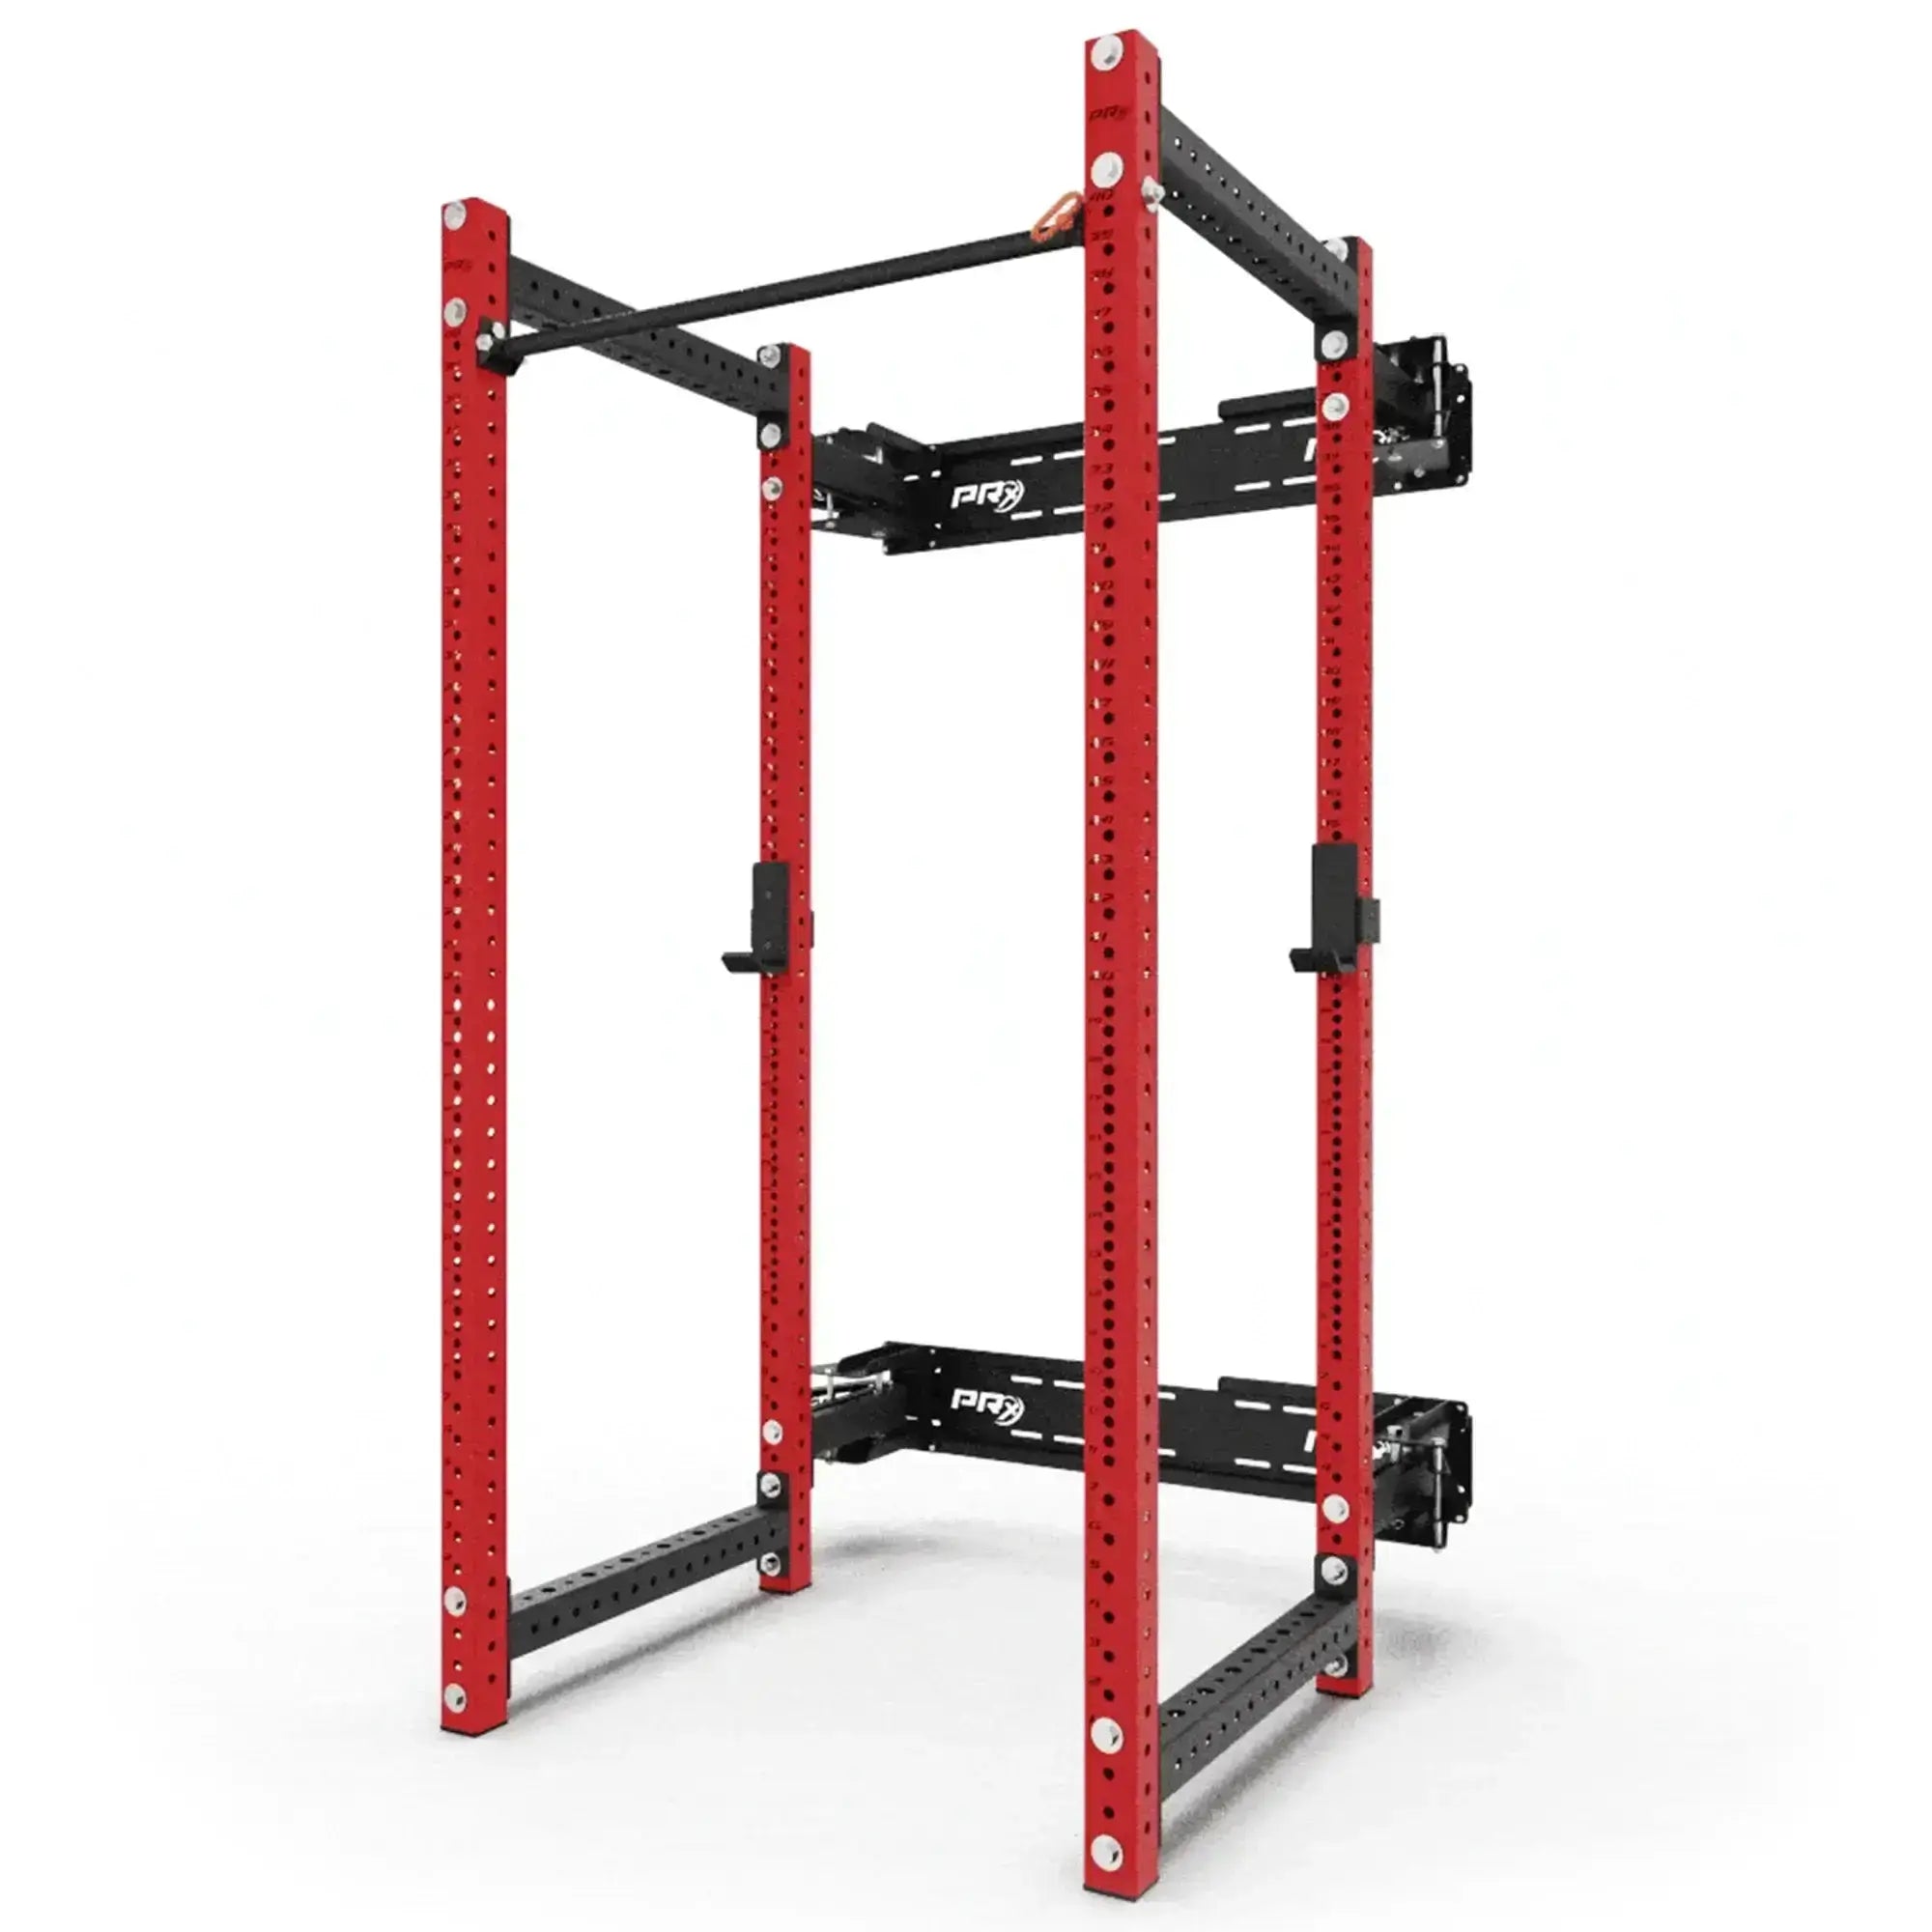 KT Pull Up Bar Stand Why Should Be Your Number-One Choice?